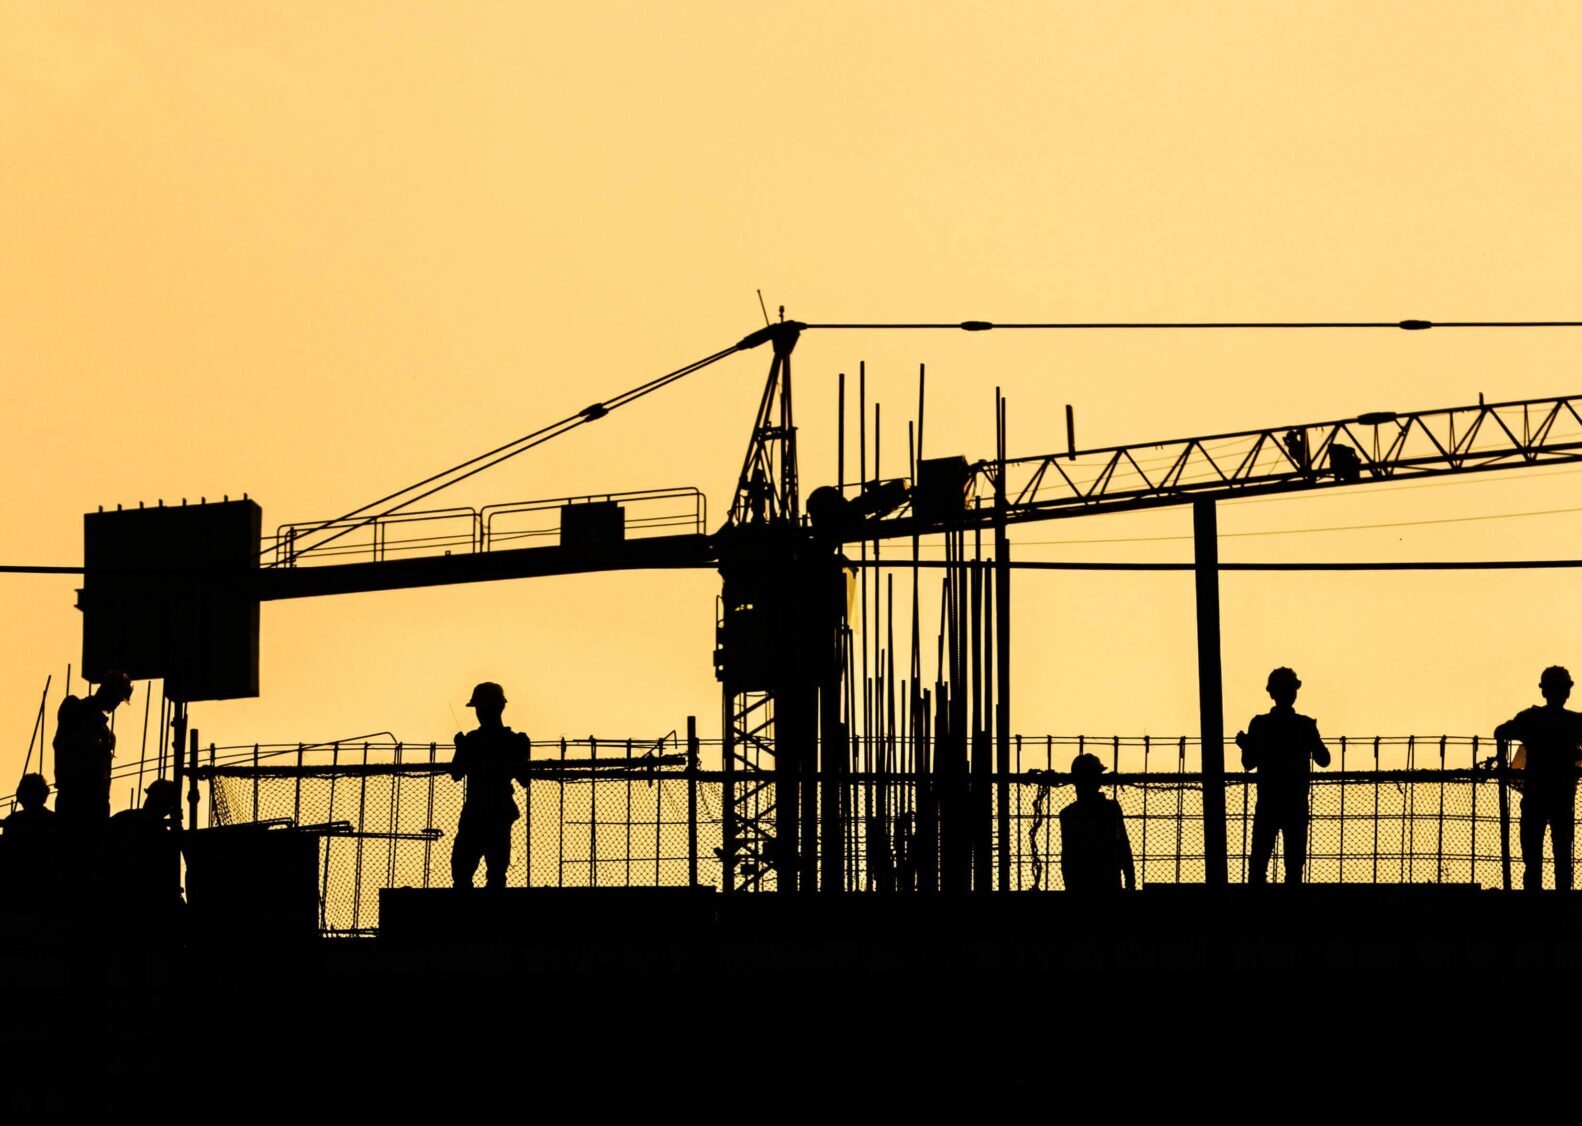 A silhouette of people at a construction site. There is a crane.